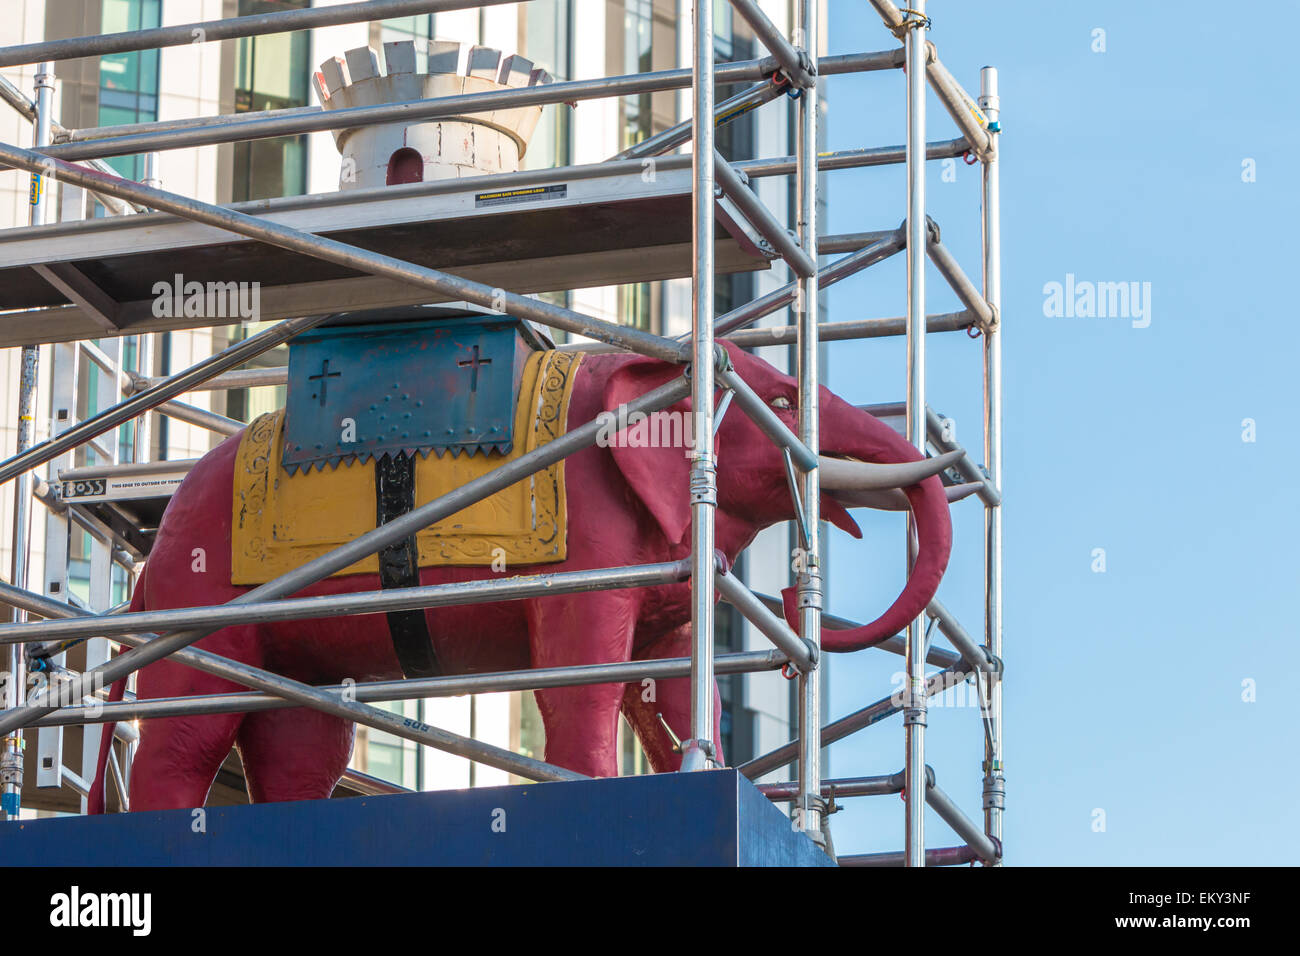 Statue of the Elephant and Castle wrapped in scaffolding before relocation - visual metaphor for the regeneration of the area Stock Photo